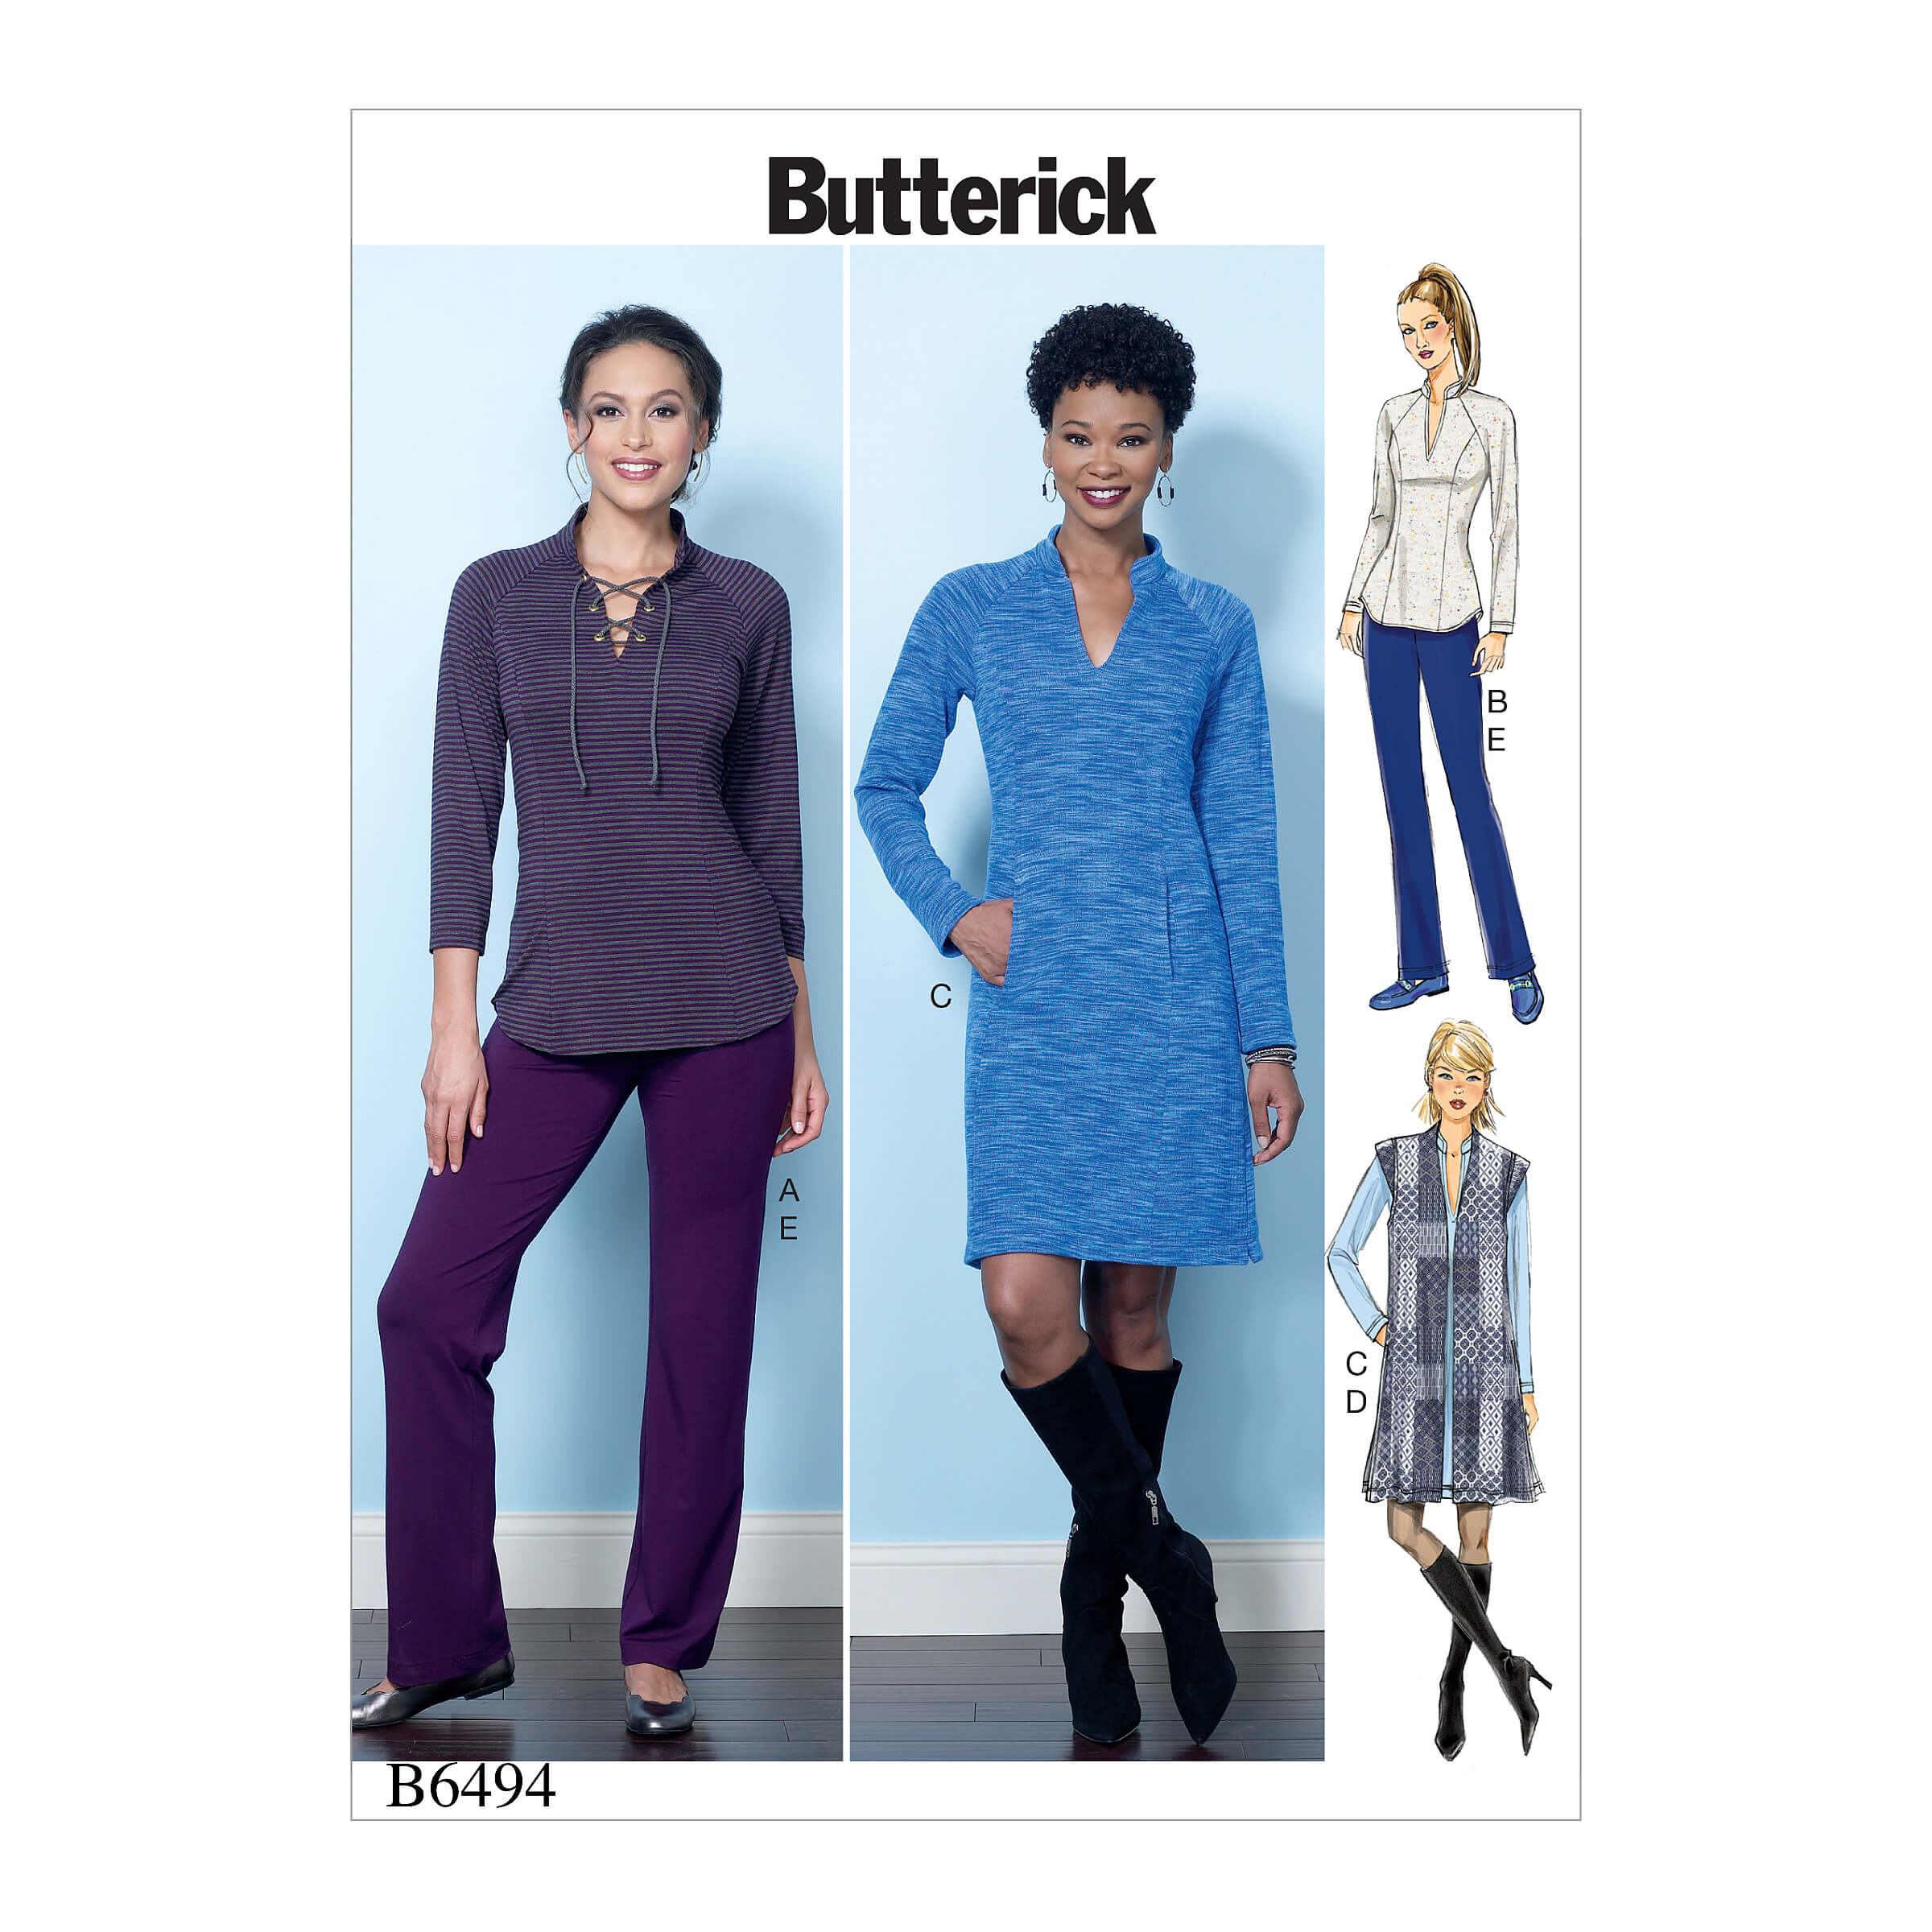 Butterick Sewing Pattern B6494 Misses' Knit Raglan Sleeve Tops and Dress, Vest, and Pull-On Pants